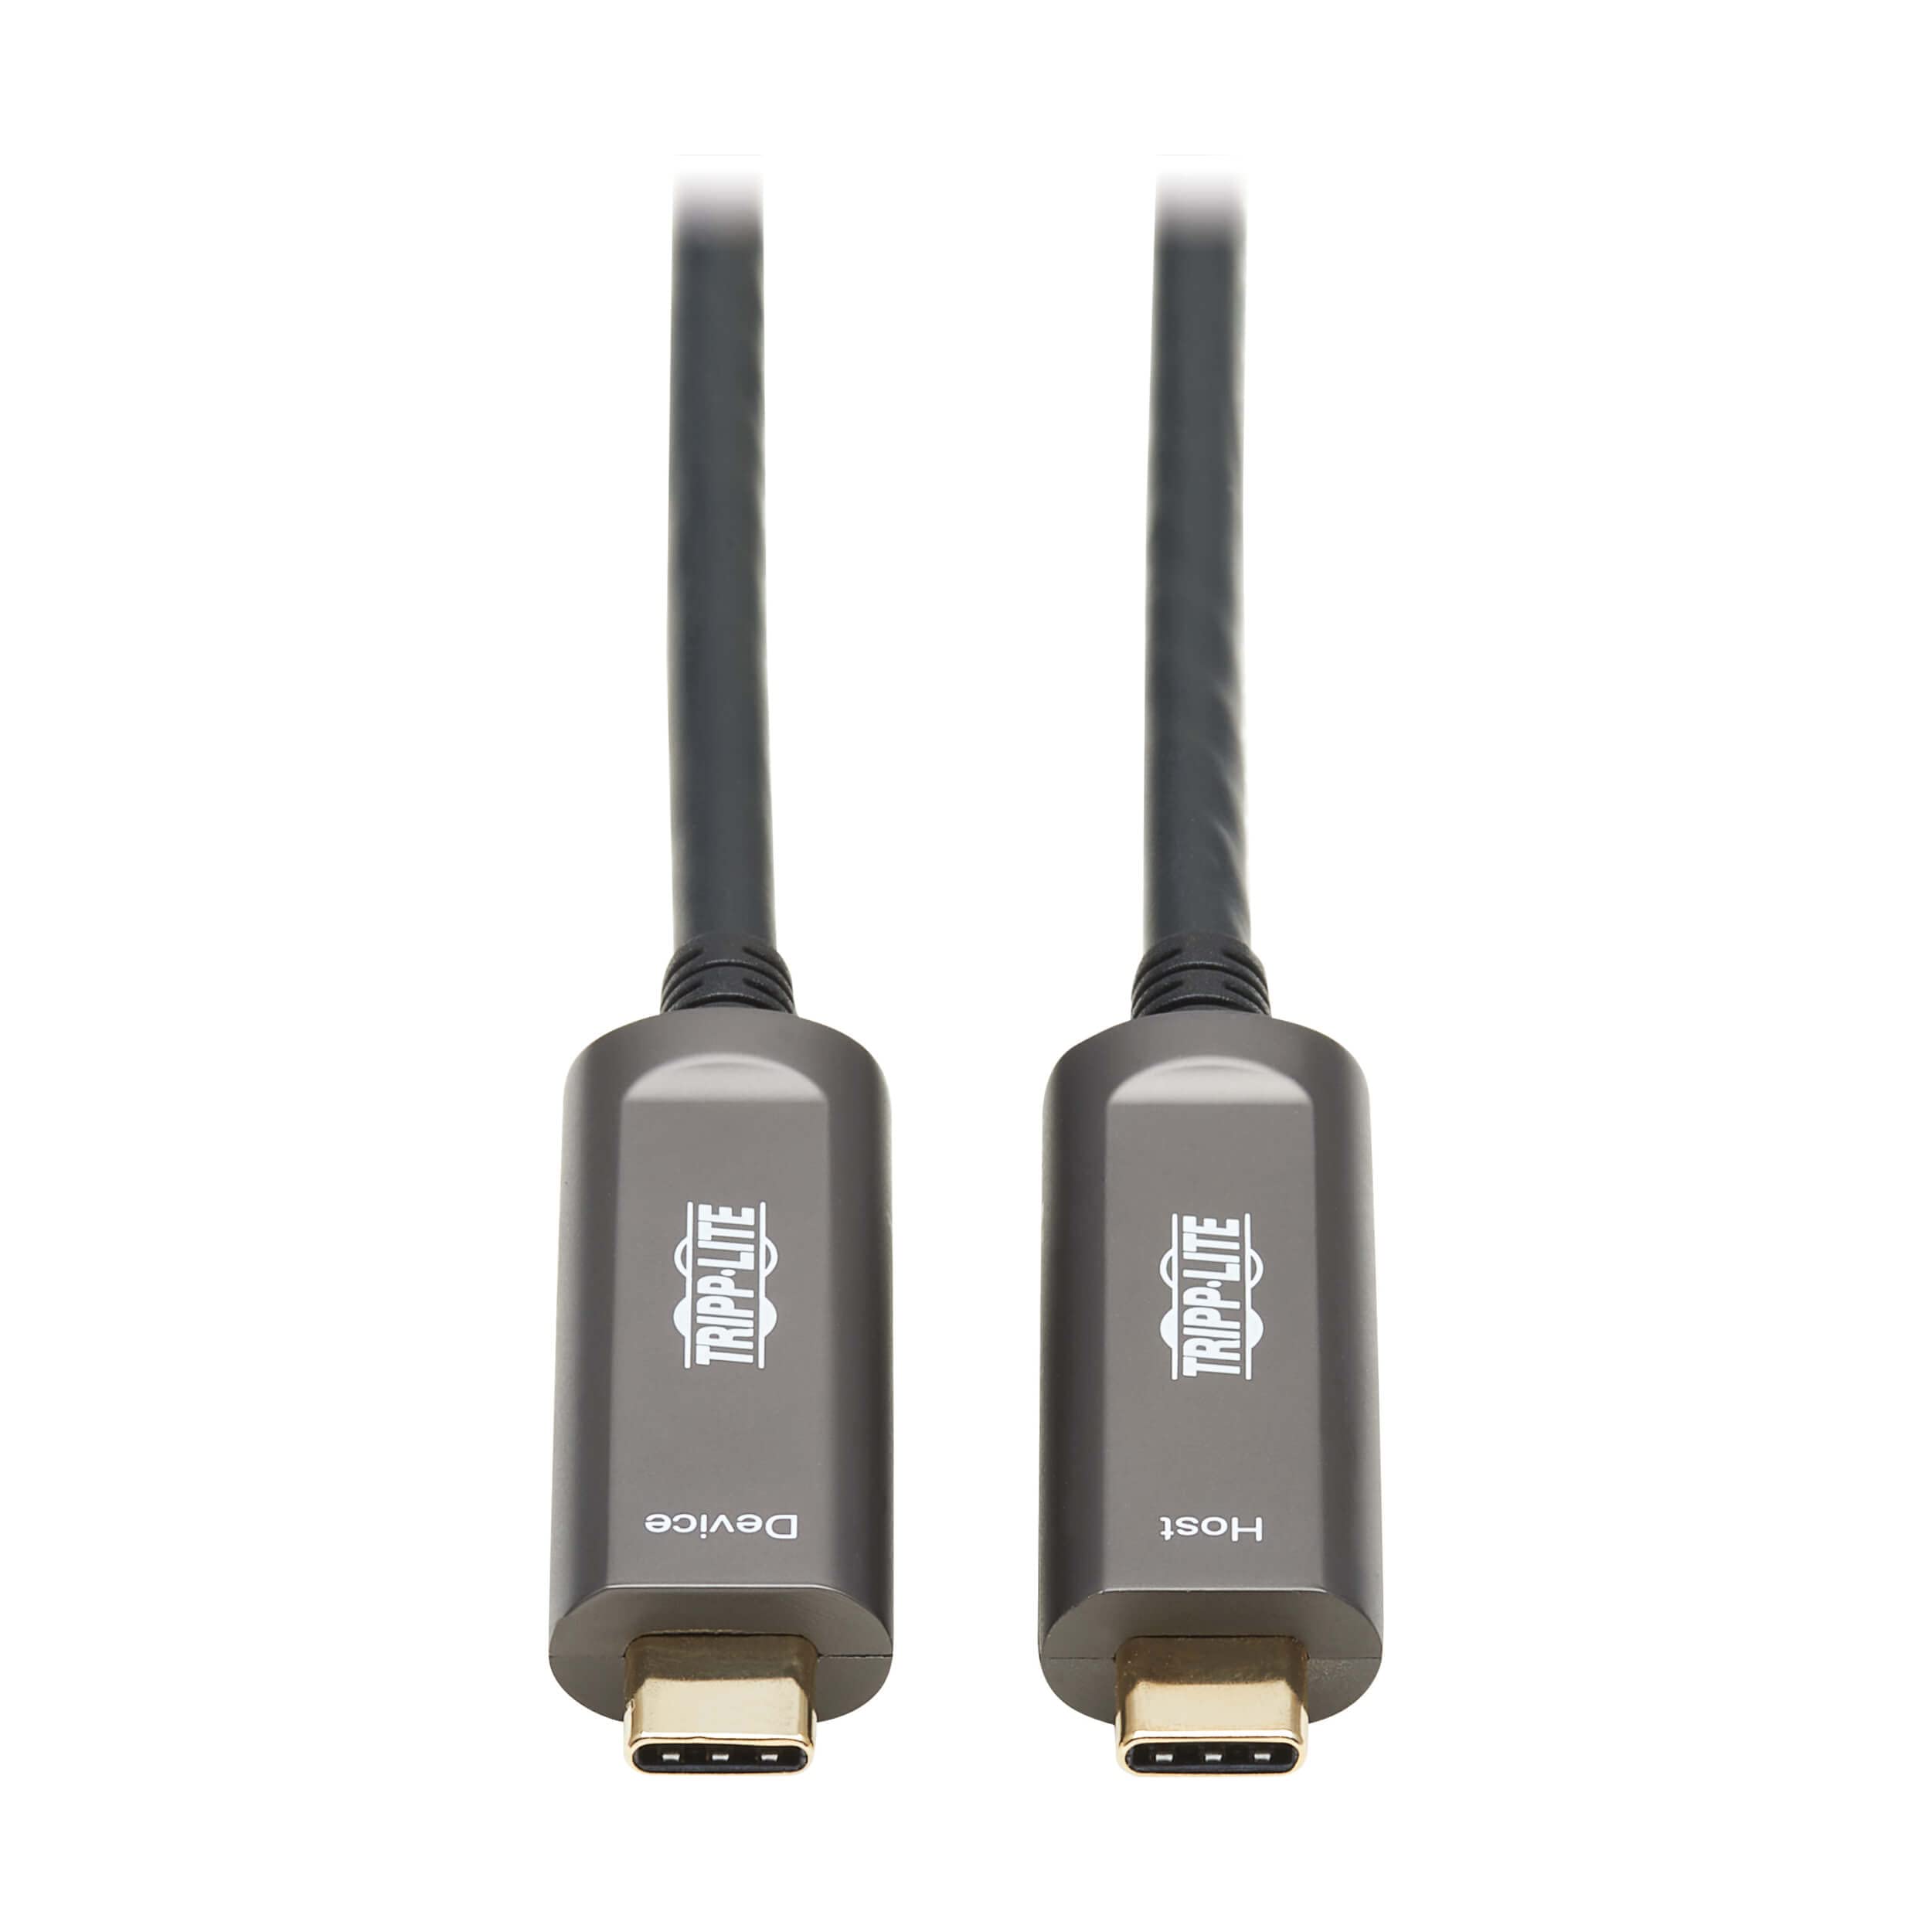 Tripp Lite USB-C Fiber (10 Gbps) Data Cable, Backward Compatible USB 3.2 Active Optical Cable, Male to Male, Plenum-Rated for Wall Installations, 49 Feet / 15 Meters, 3-Year Warranty (U420F-15M-D321)